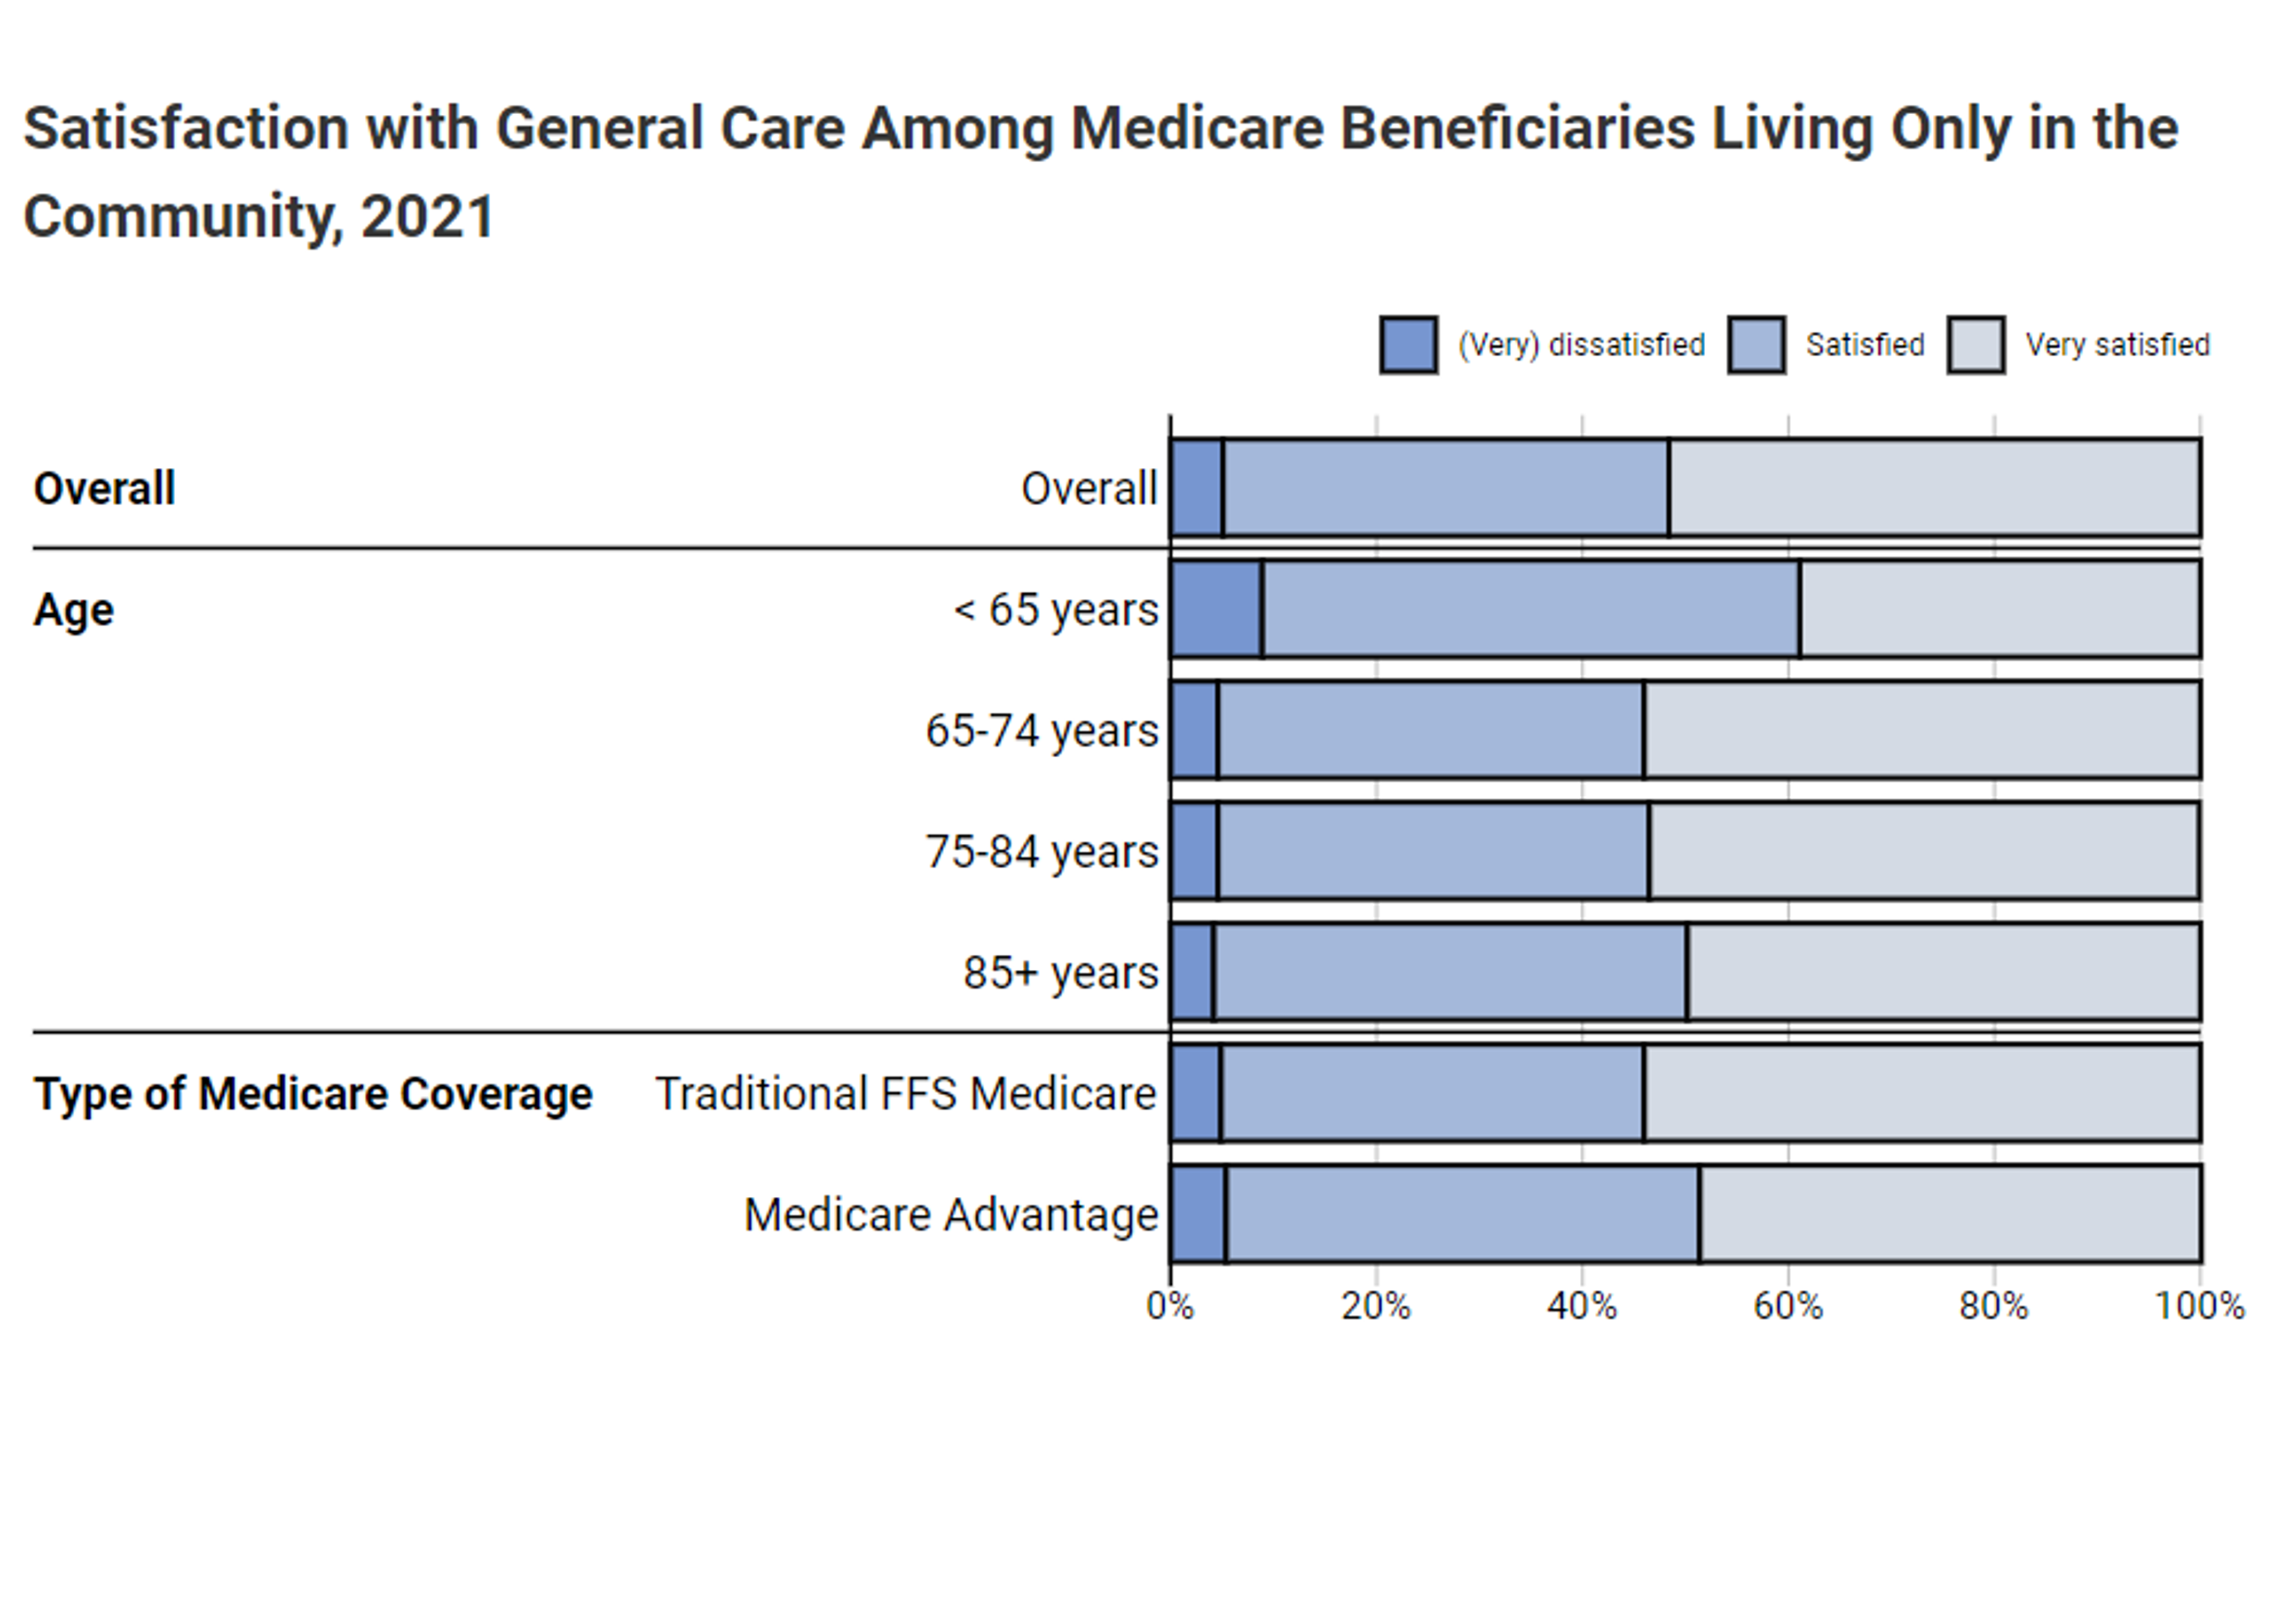 This image shows an example of a chart from the third domain, Health Care Access and Satisfaction. The example shows satisfaction with general care among Medicare beneficiaries living only in the community overall and by race/ethnicity and type of Medicare coverage in 2020.